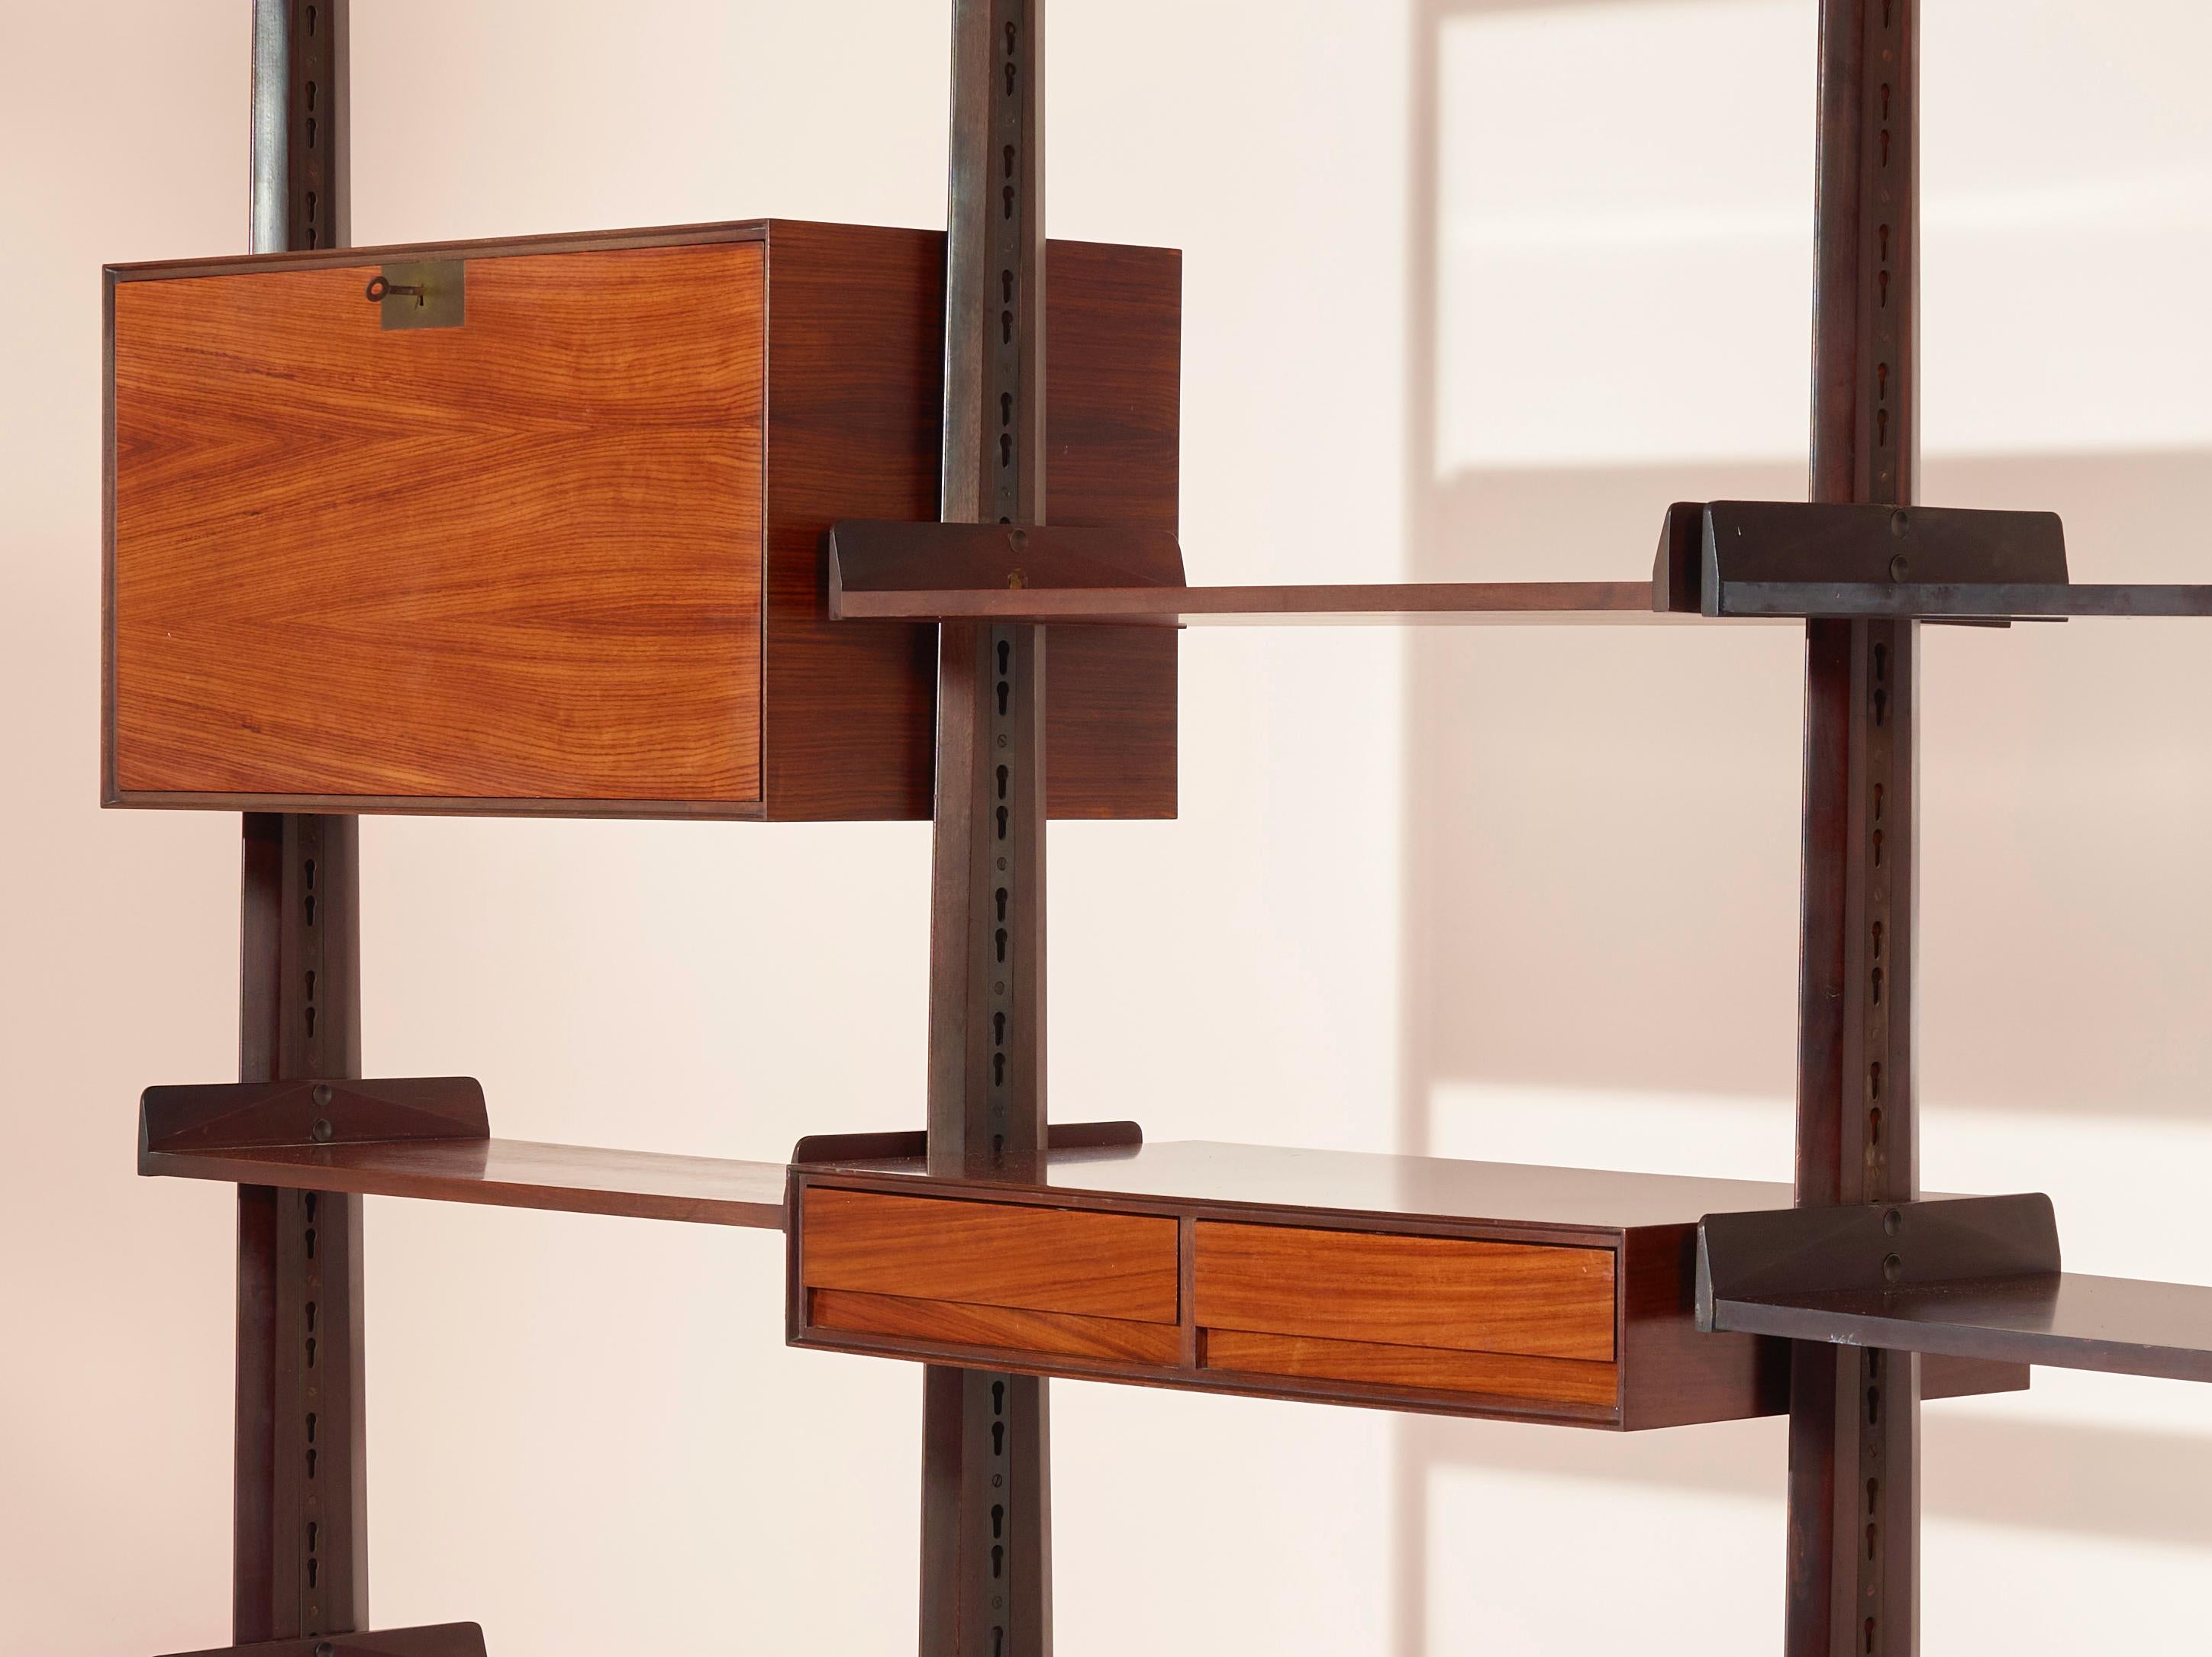 Mid-20th Century Vittorio Dassi Teak Wall Unit with Shelves and Storage Units, Italy, 1950s